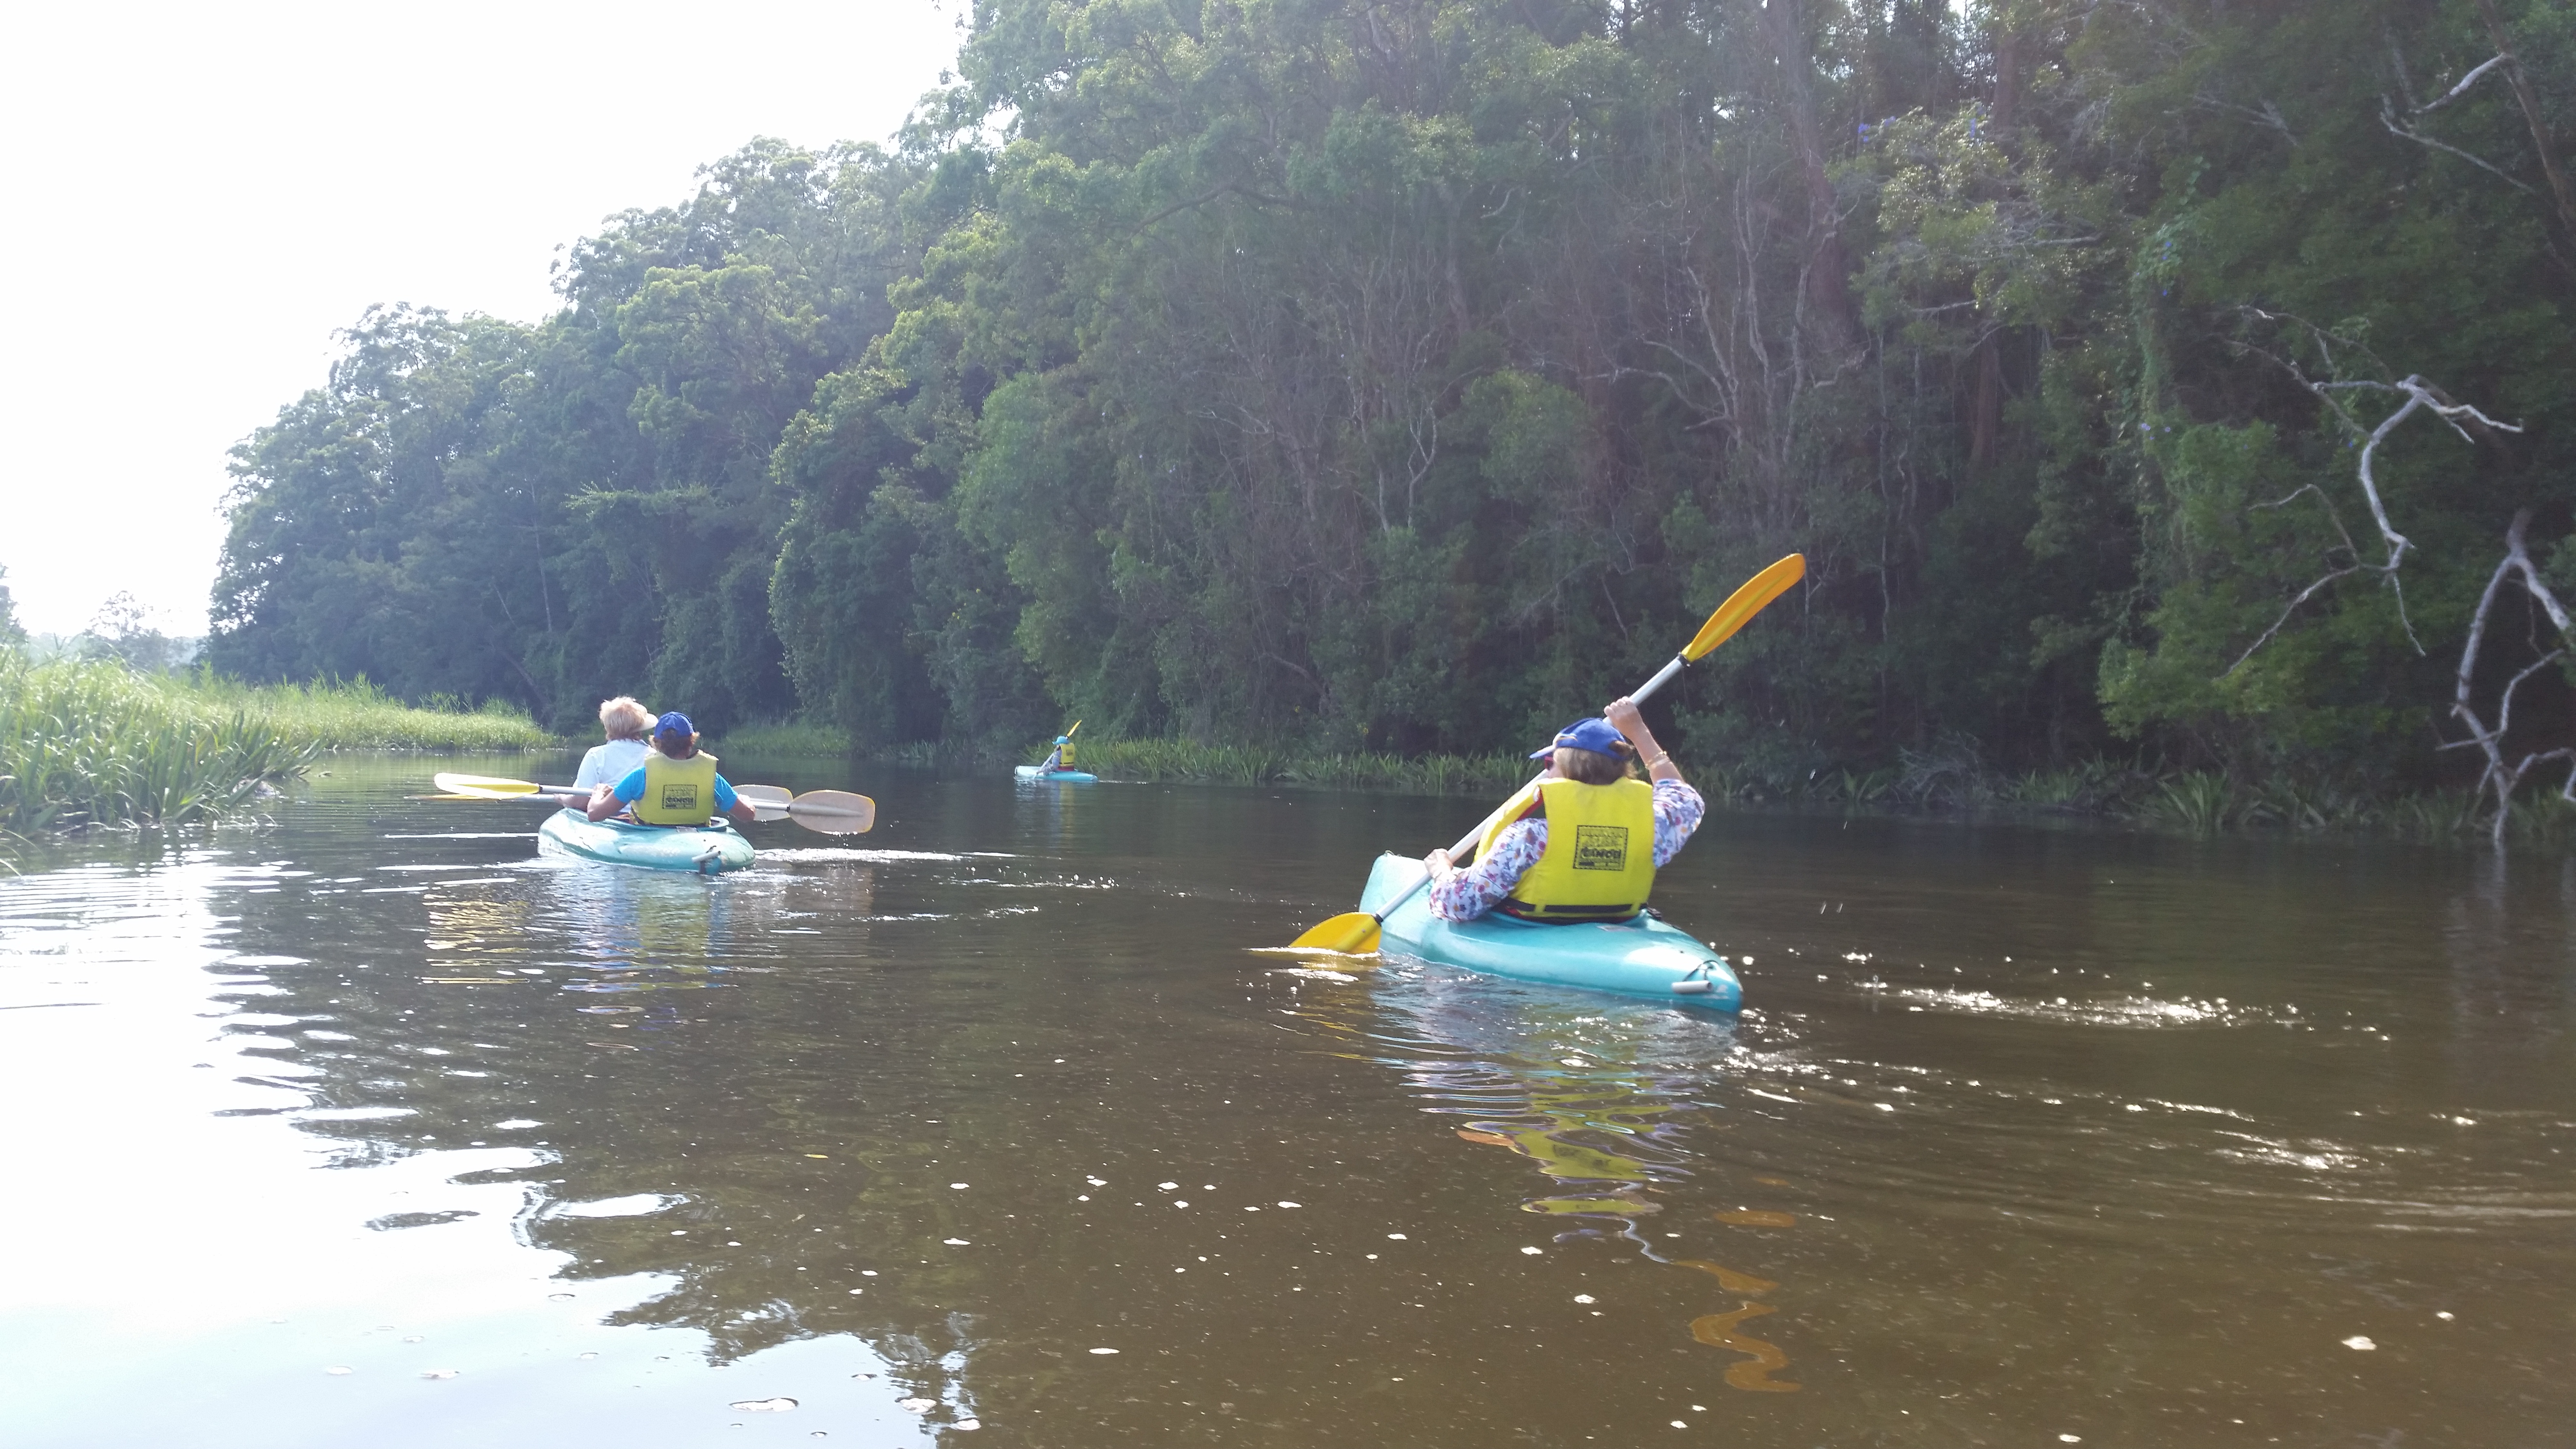 Canoeing on the Bellinger River. Amid killer cows.